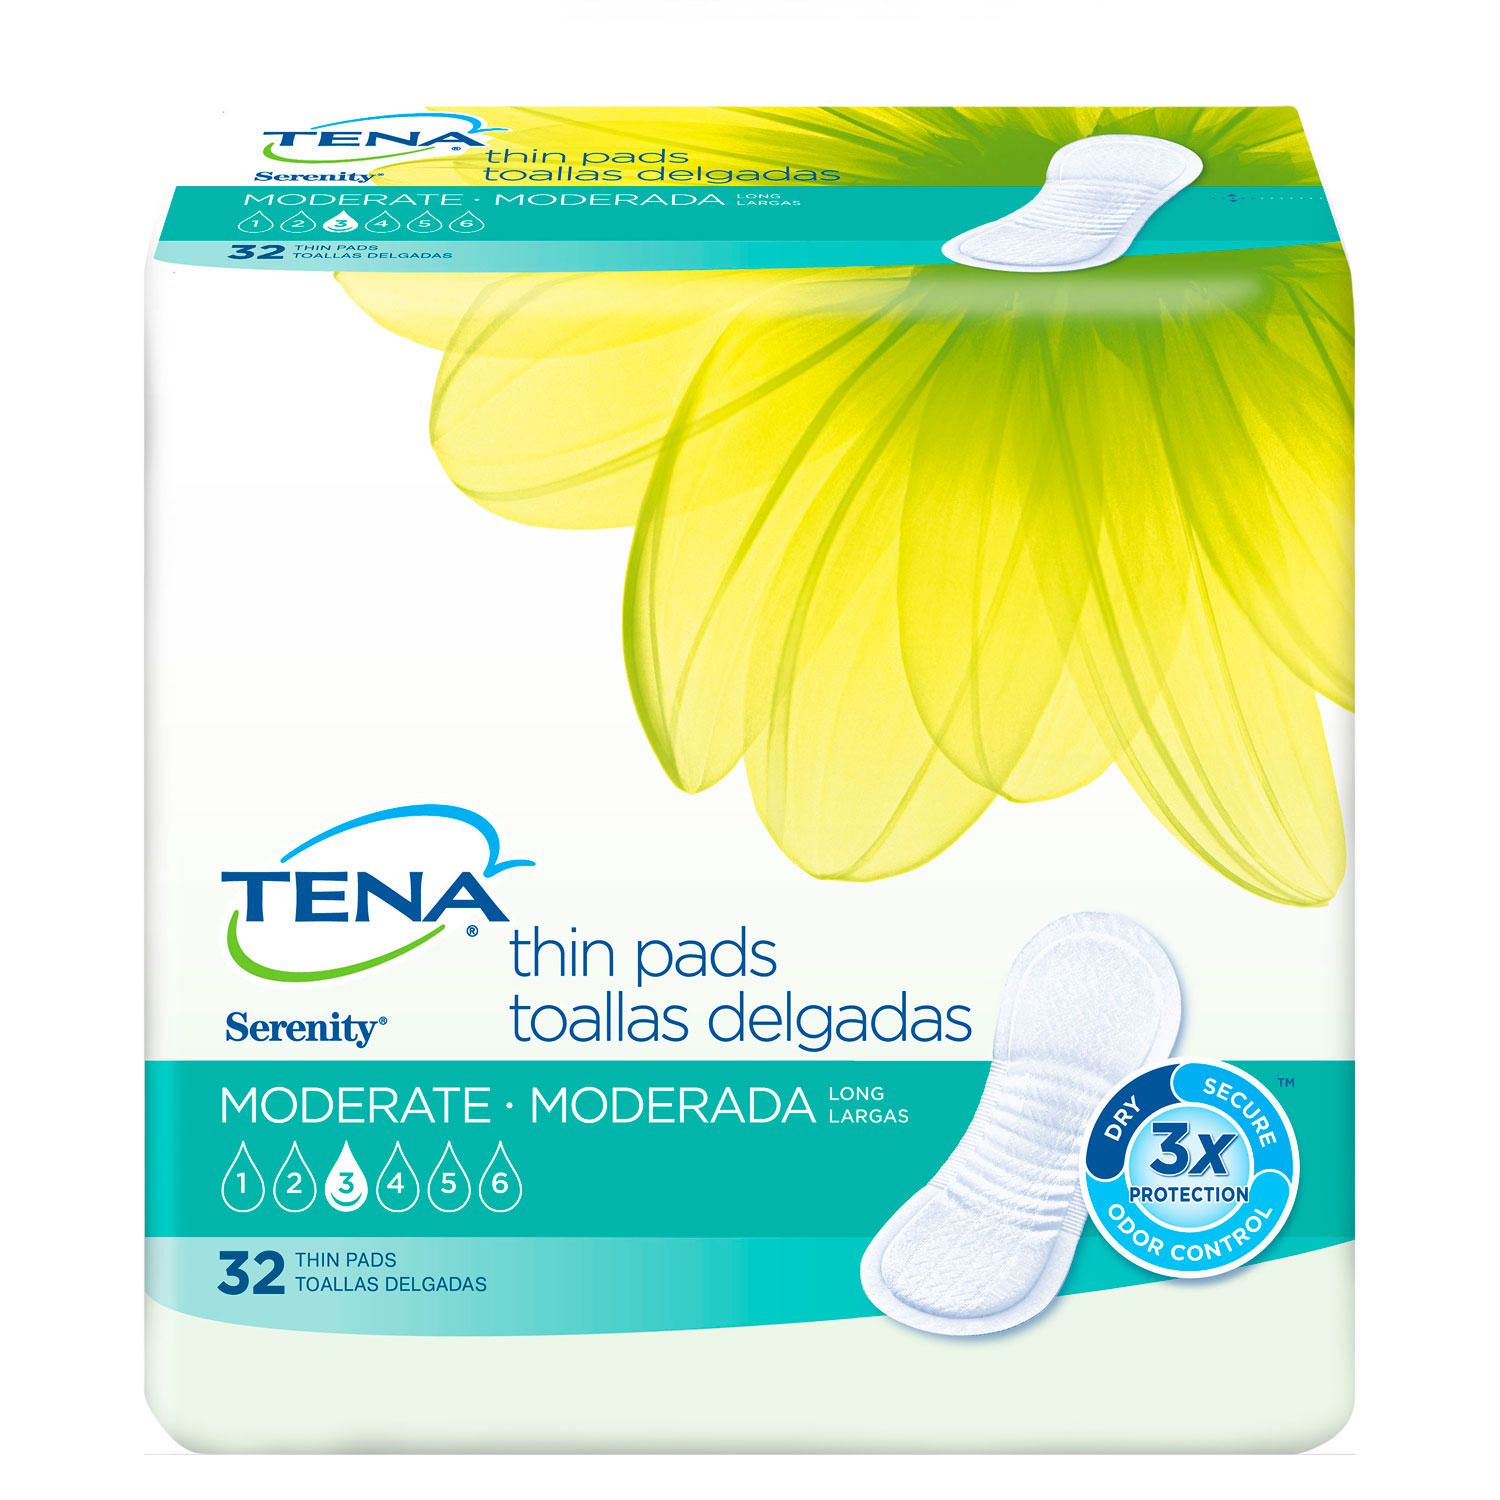 TENA Incontinence Pads for Women, Moderate Thin, Long, 32 Count ...